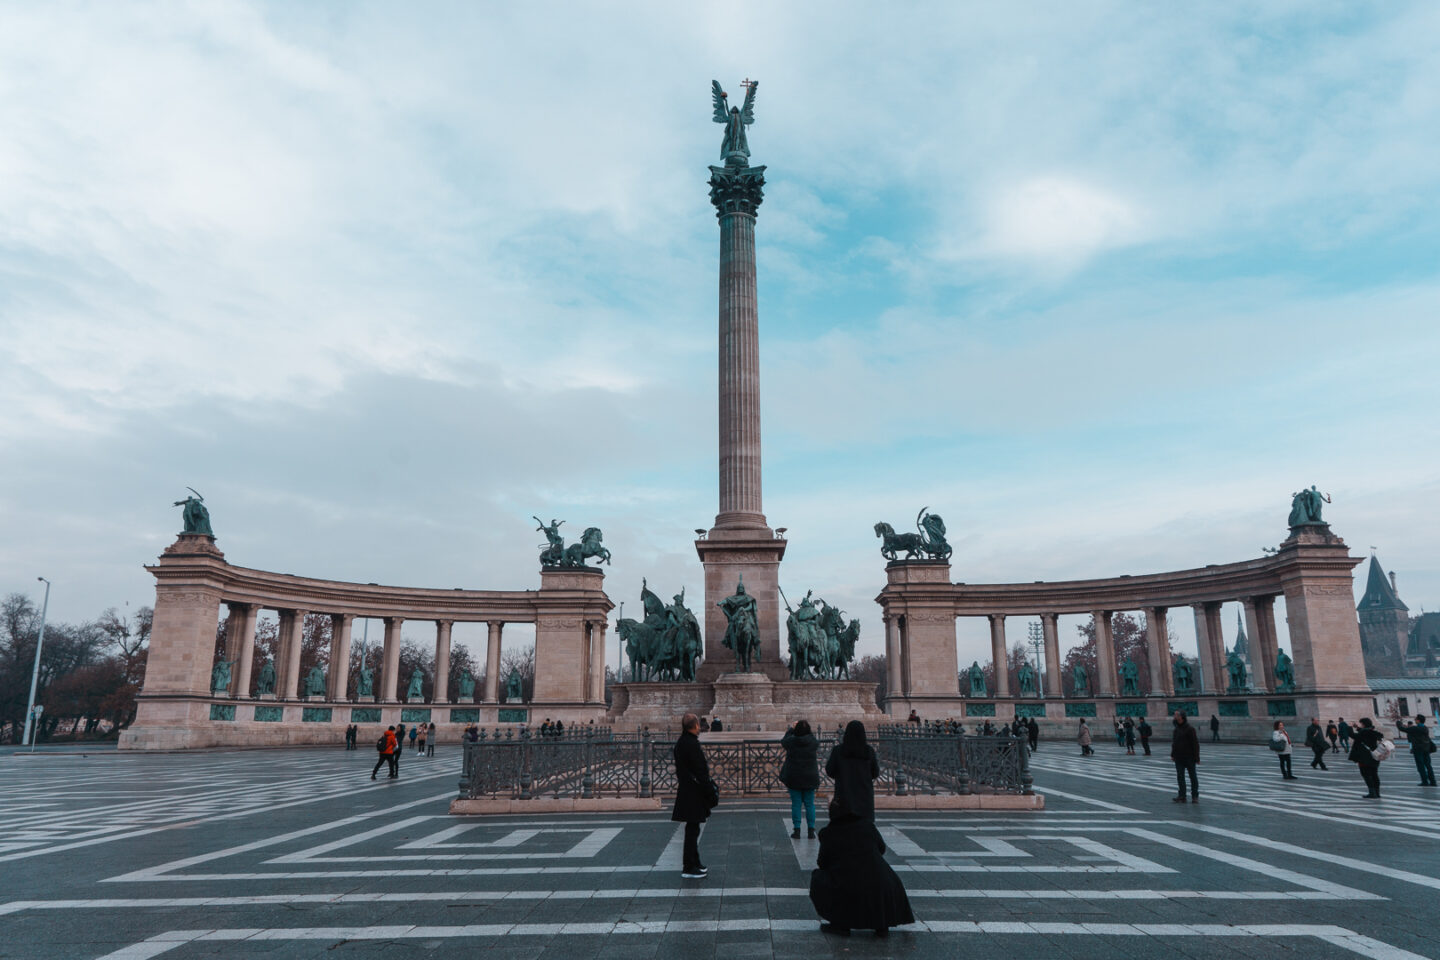 Tourists admiring Hero's square - a must-do on your 3 day Budapest itinerary.